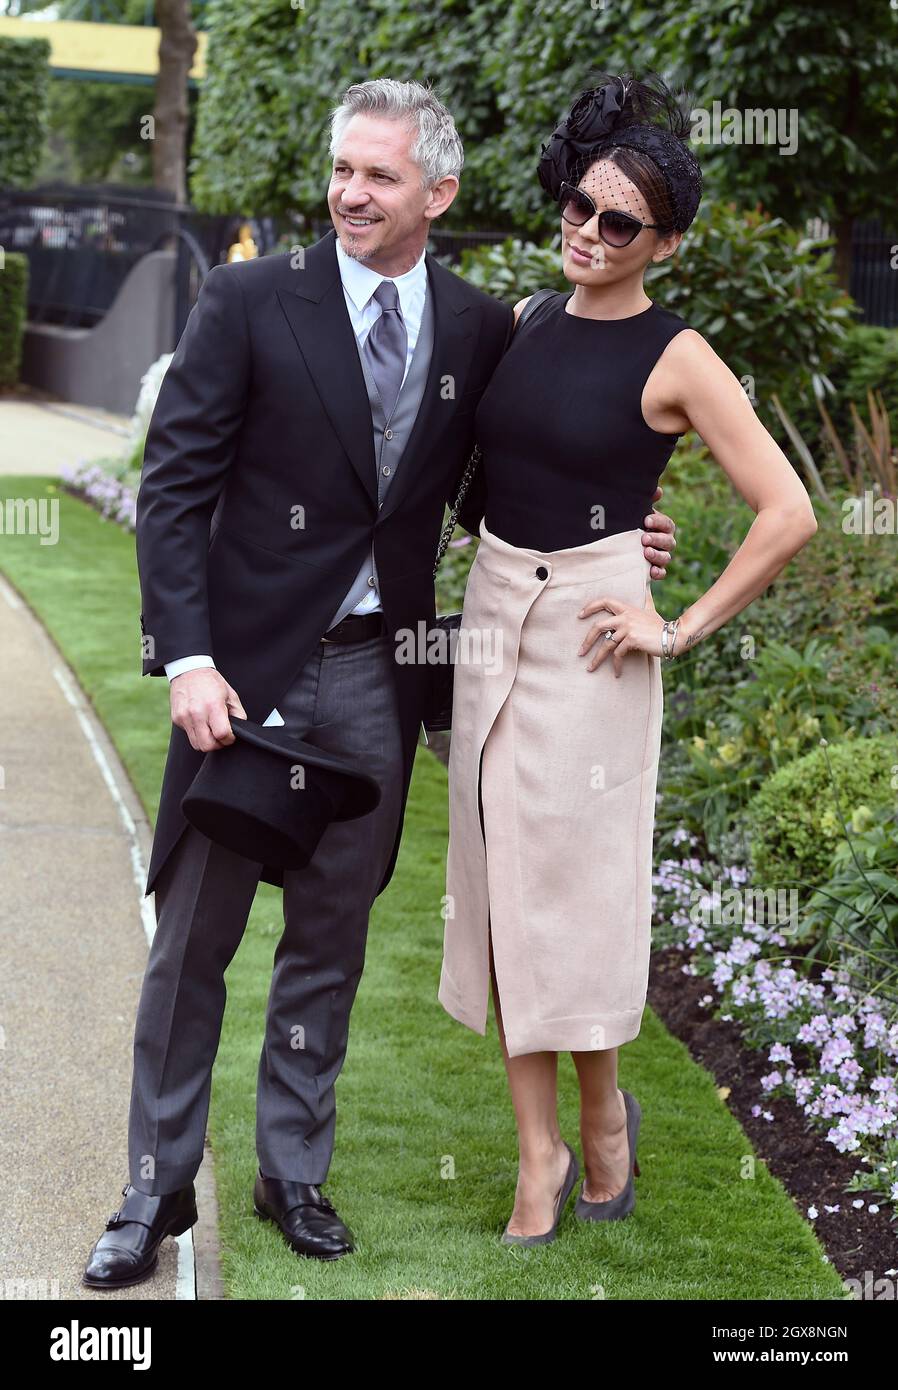 Gary Lineker and Danielle Lineker attend Day 1 of Royal Ascot on June 16, 2015. Stock Photo